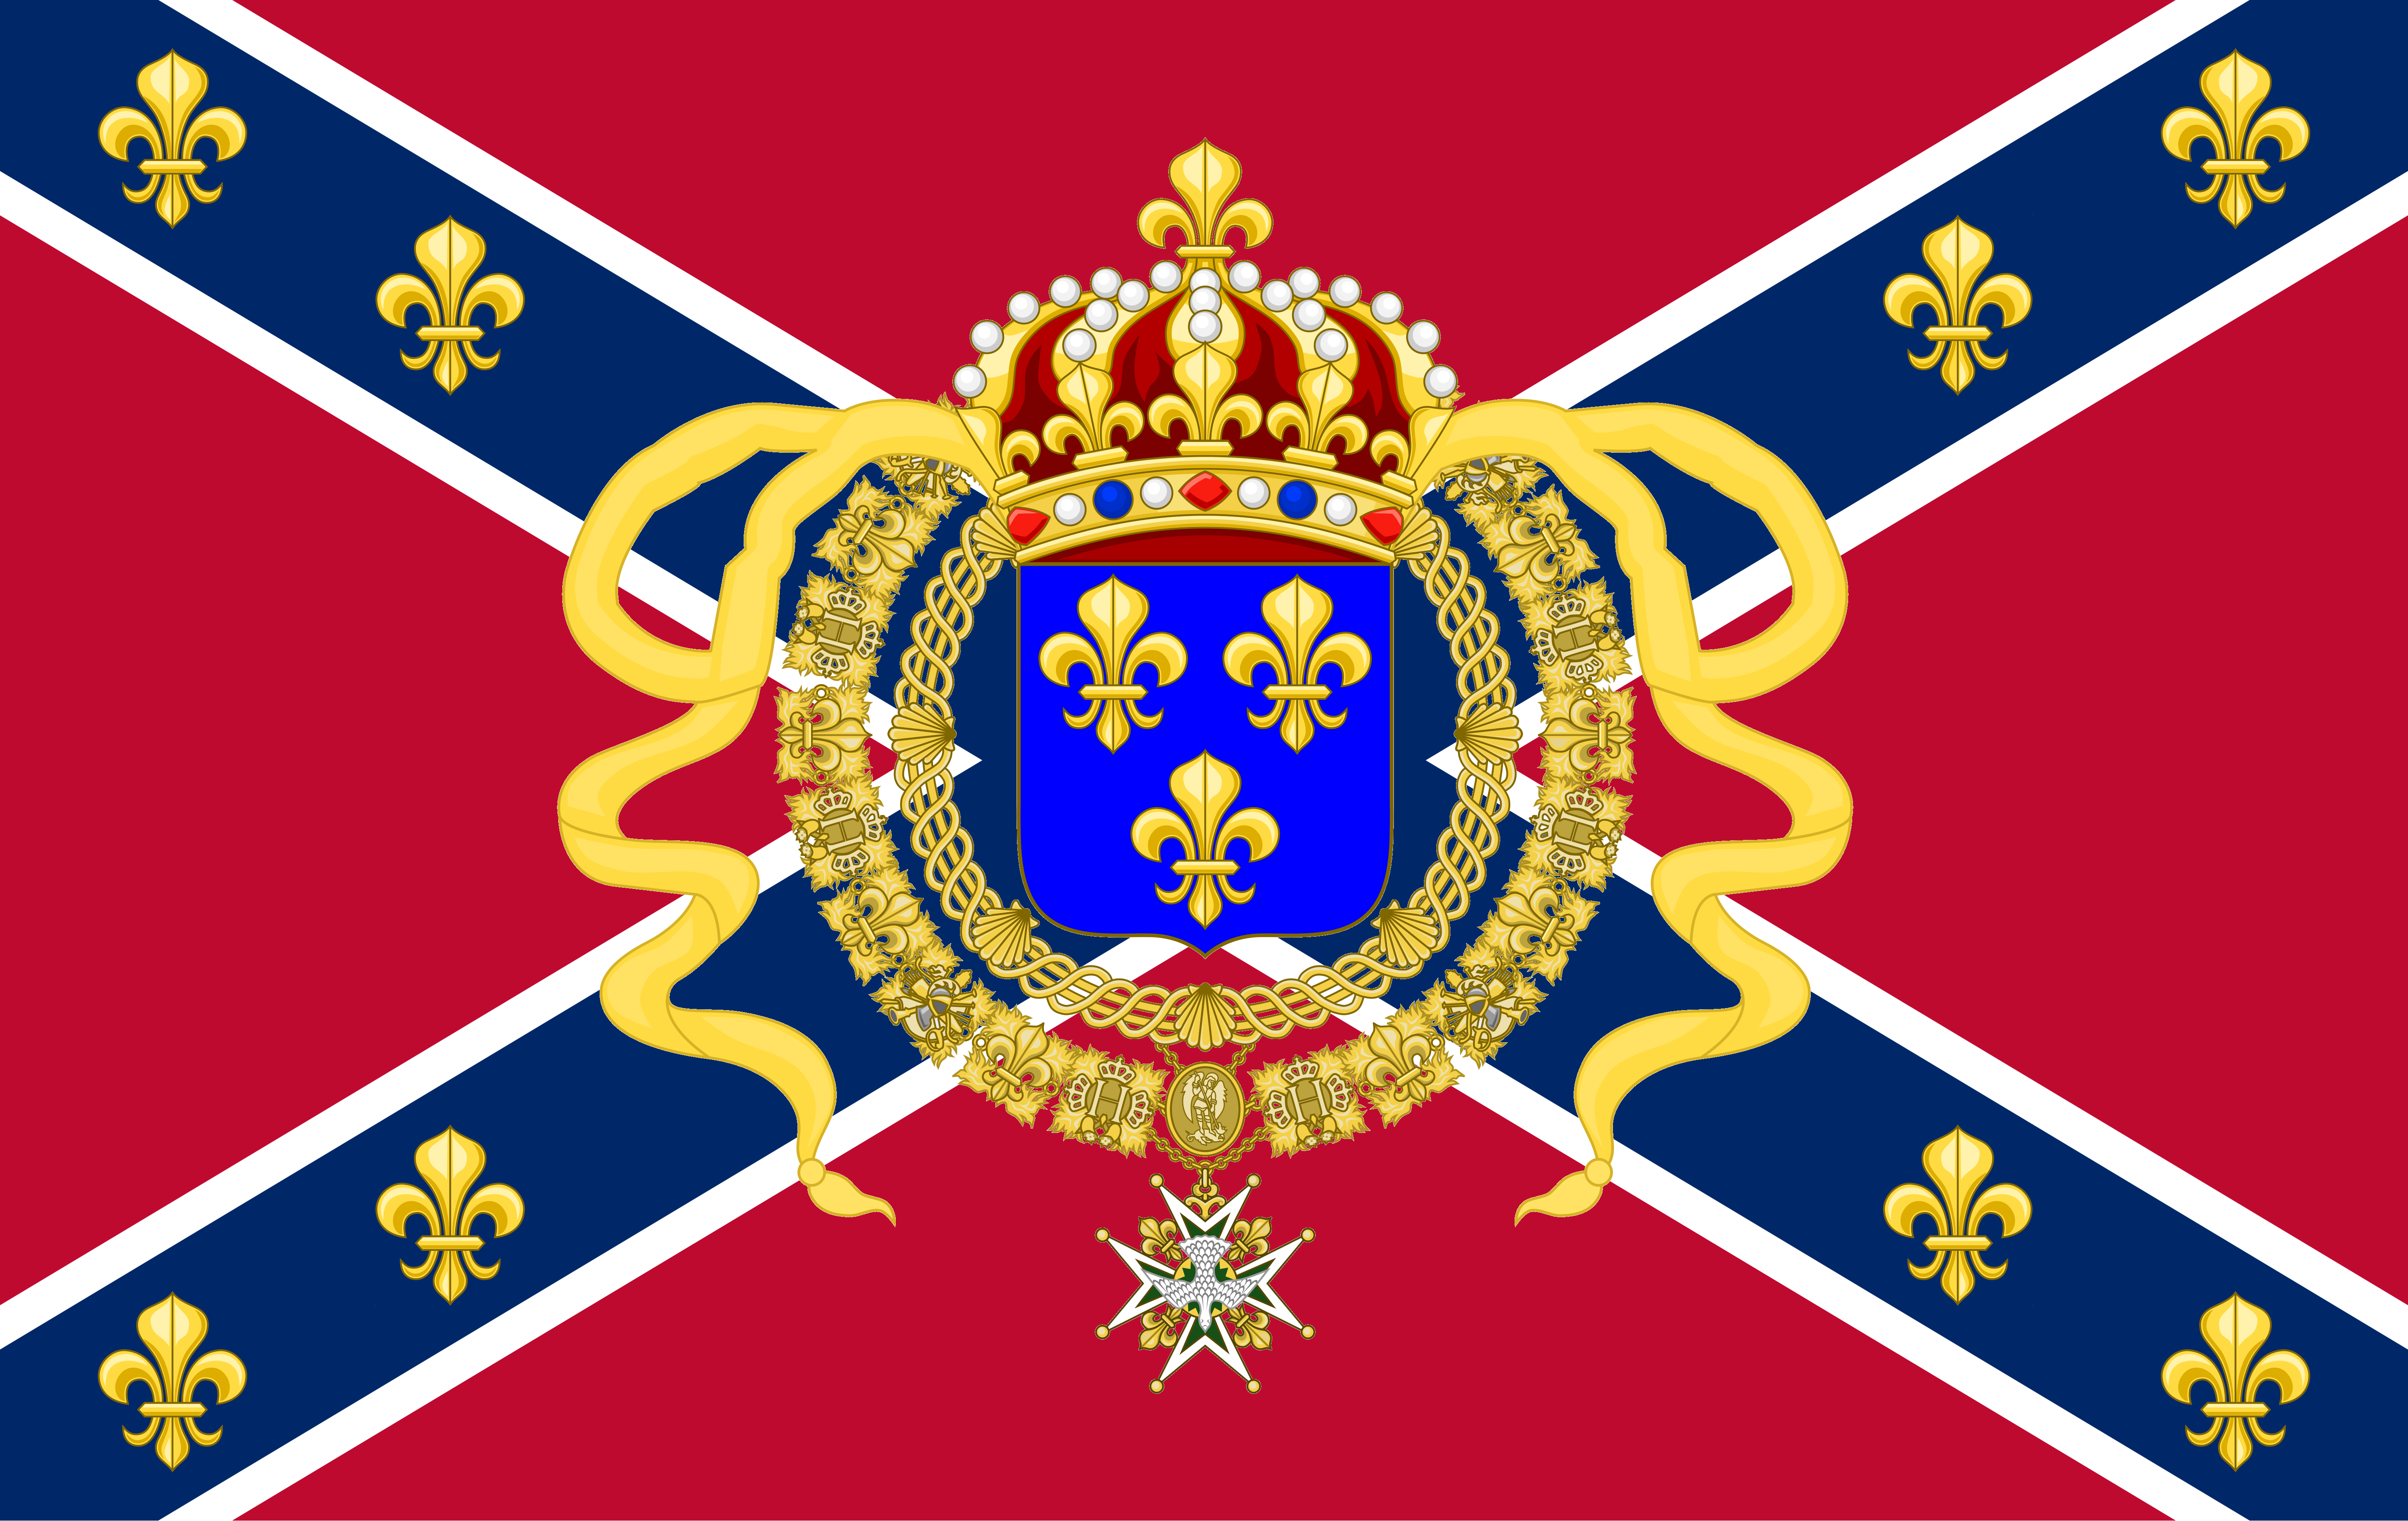 kingdom_of_new_france_by_uskok-d8uasaw.png